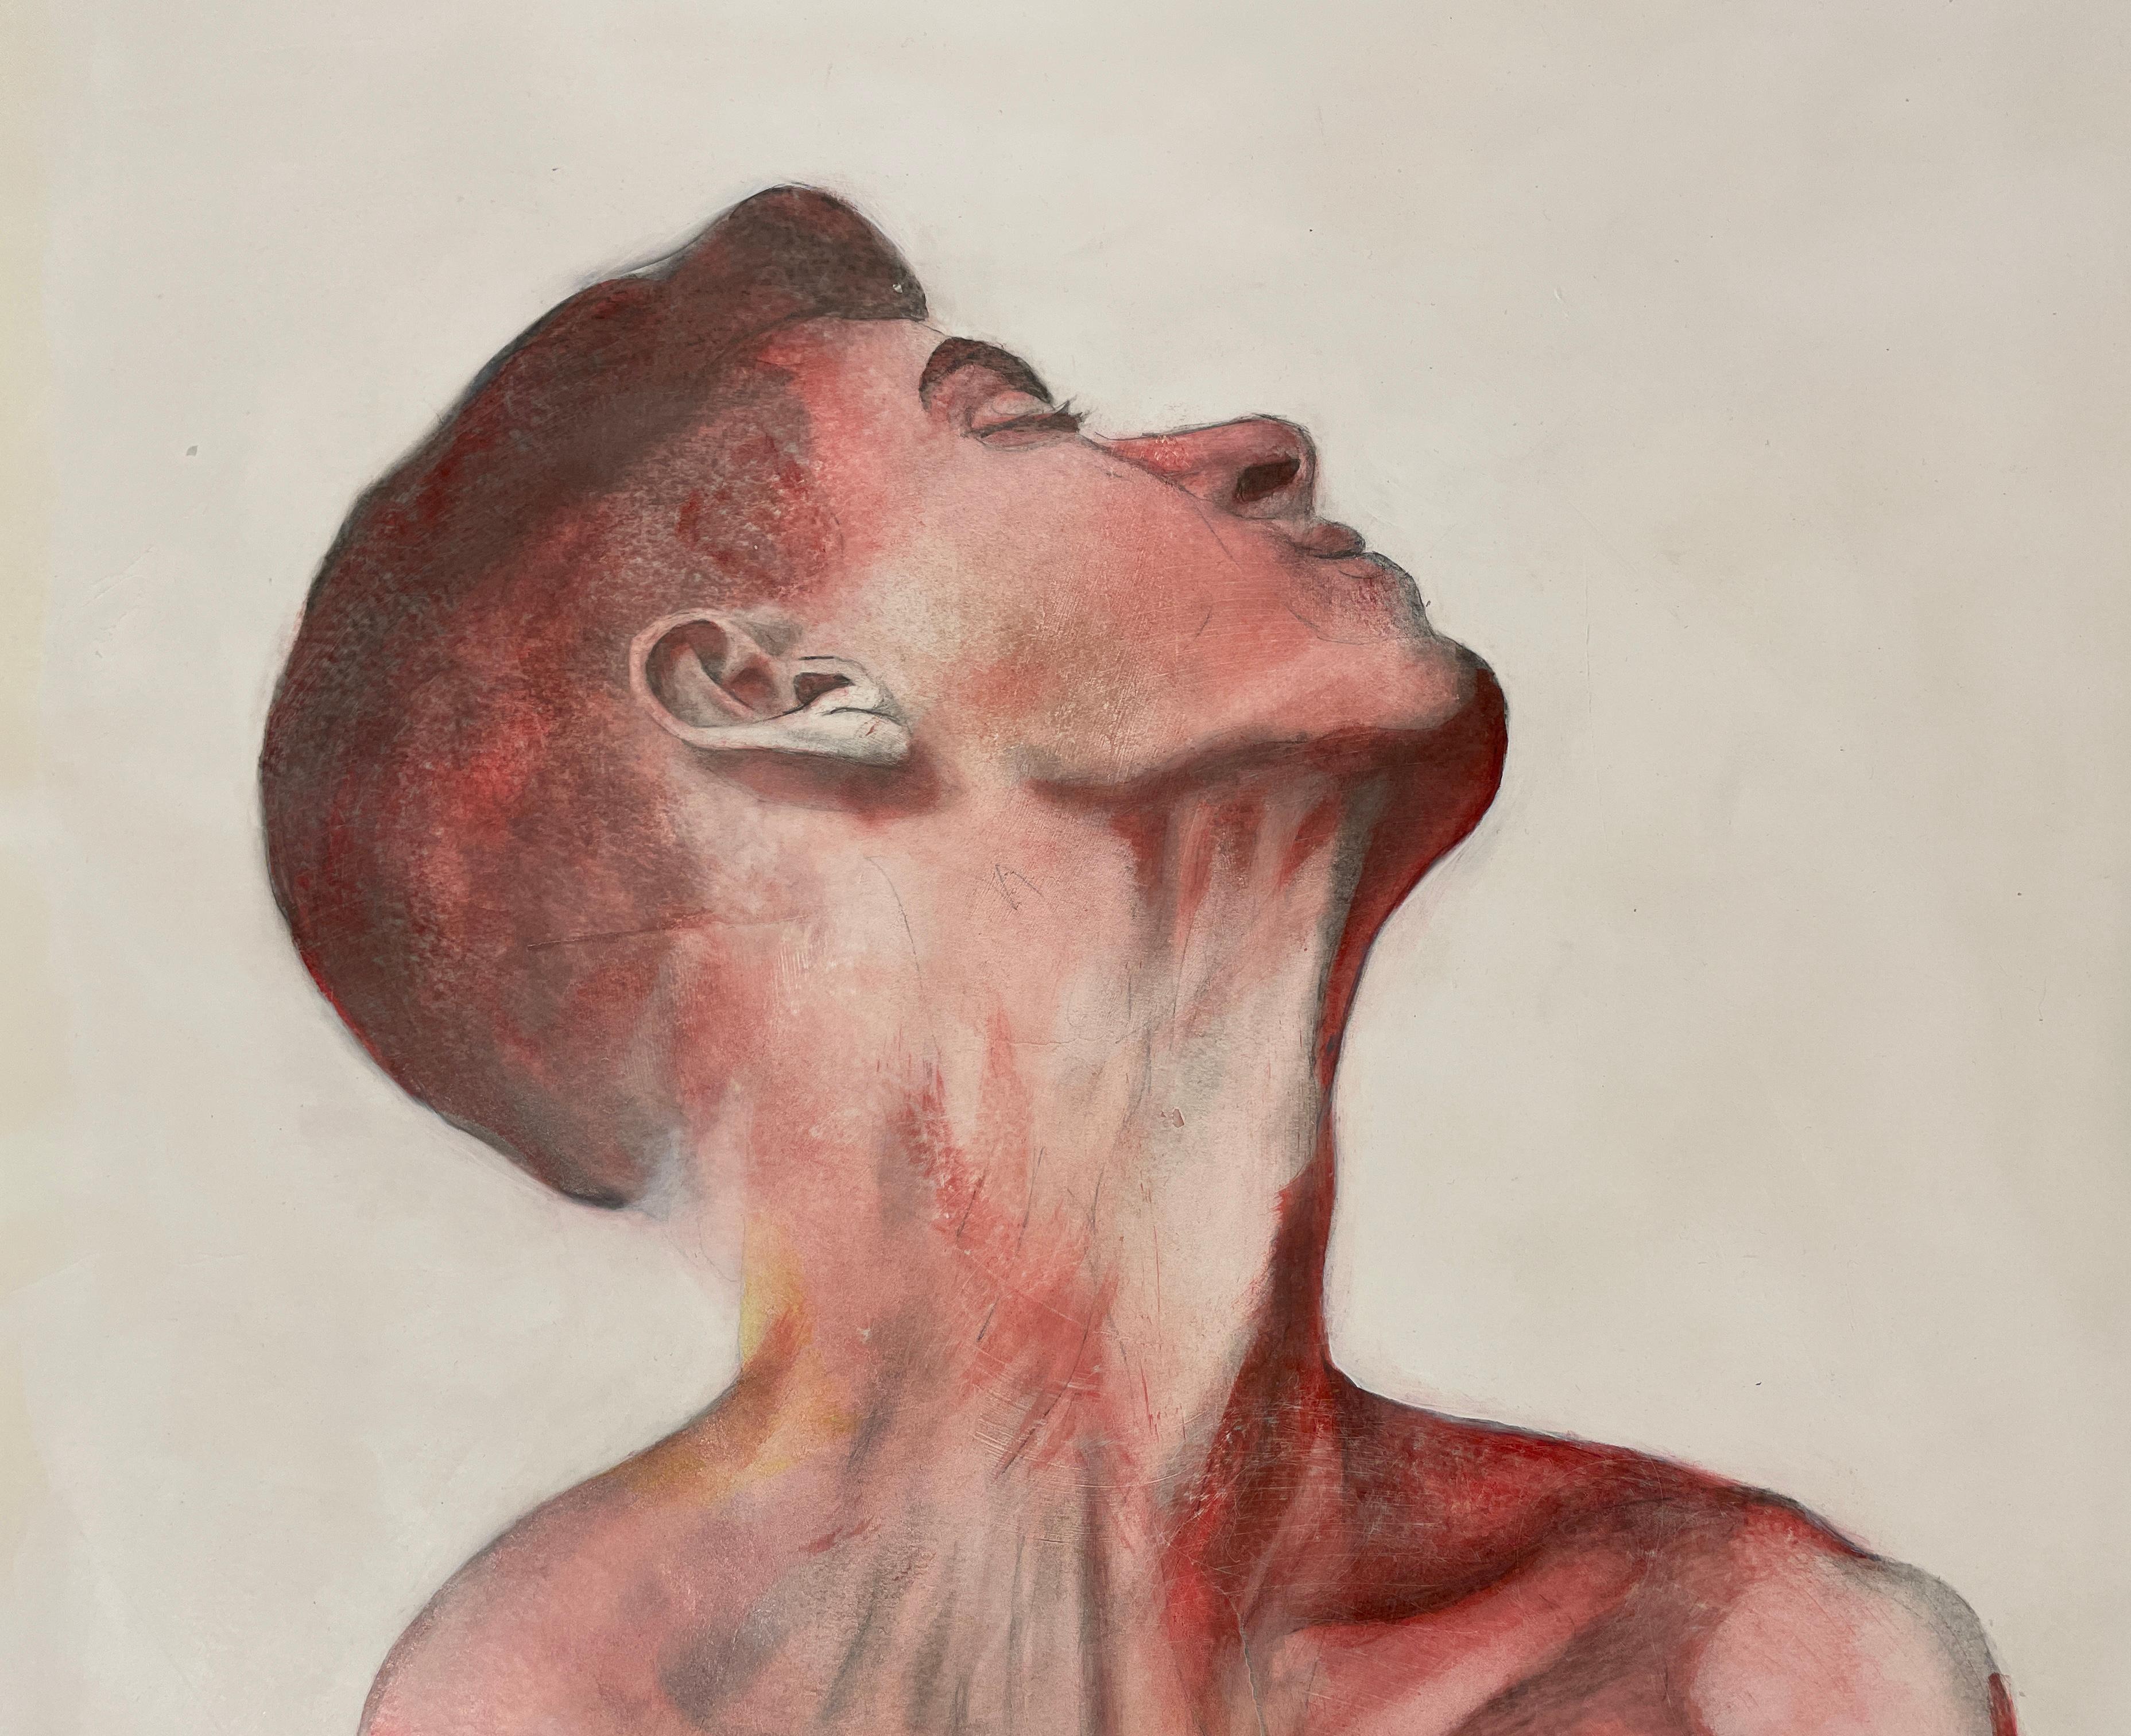  Fear of a Constantly Harrowed Heart - Male Nude Torso, Oil & Graphite on Paper - Art by Rick Sindt